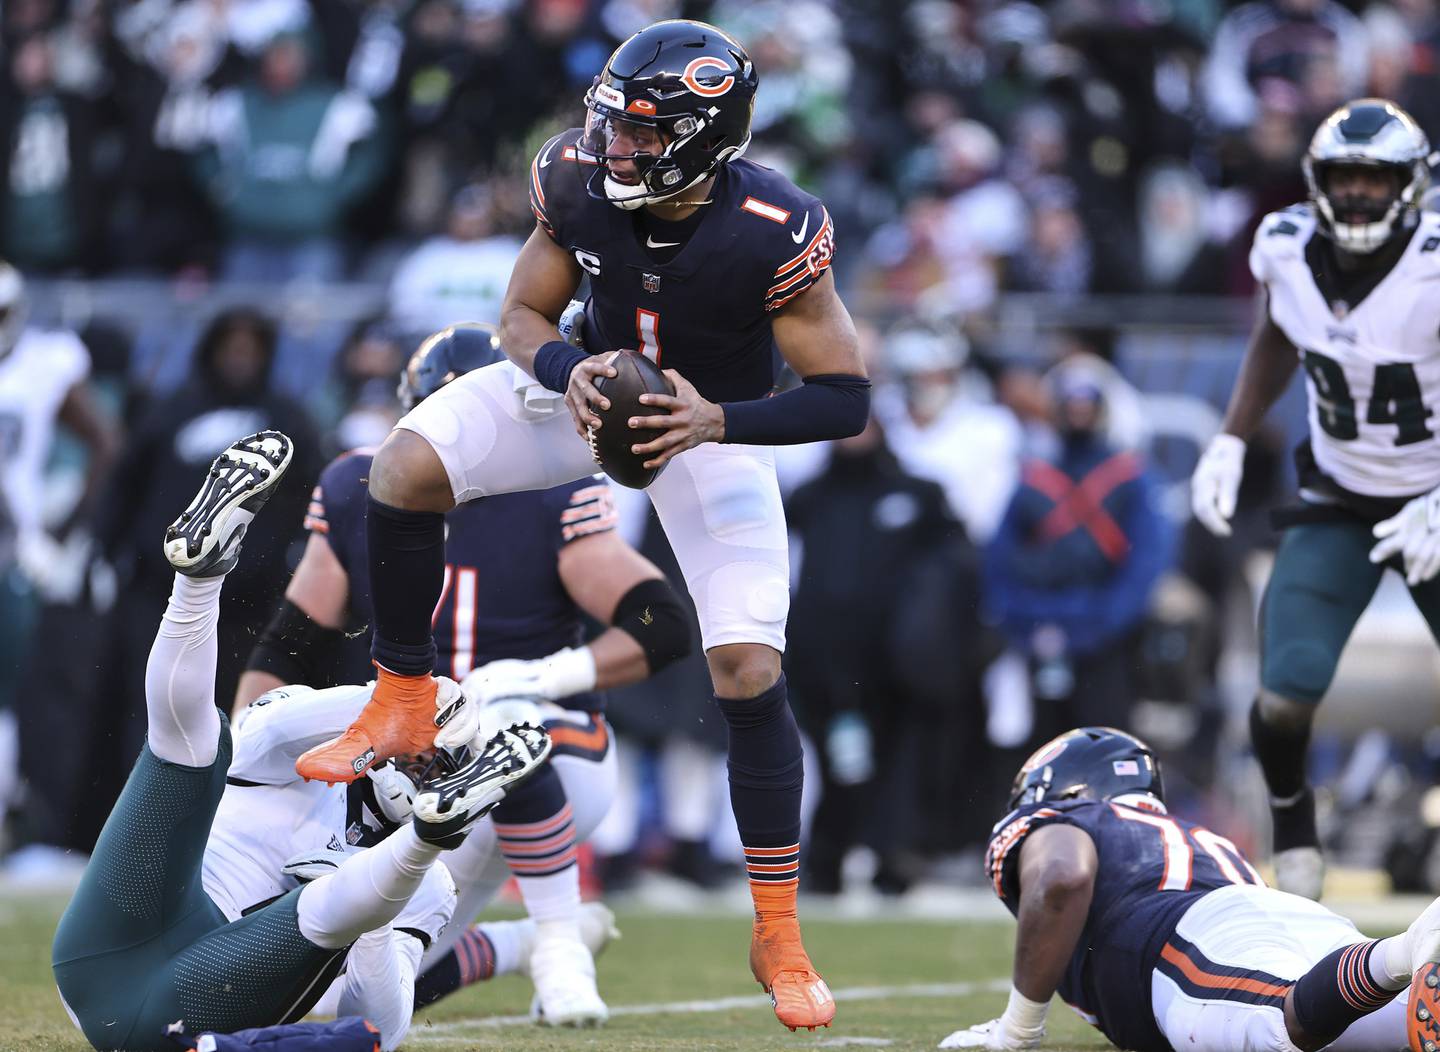 Bears quarterback Justin Fields (1) hops as he eludes the Eagles defense in the fourth quarter Sunday, Dec. 18, 2022, at Soldier Field. Fields briefly left the game after the play because of cramps.